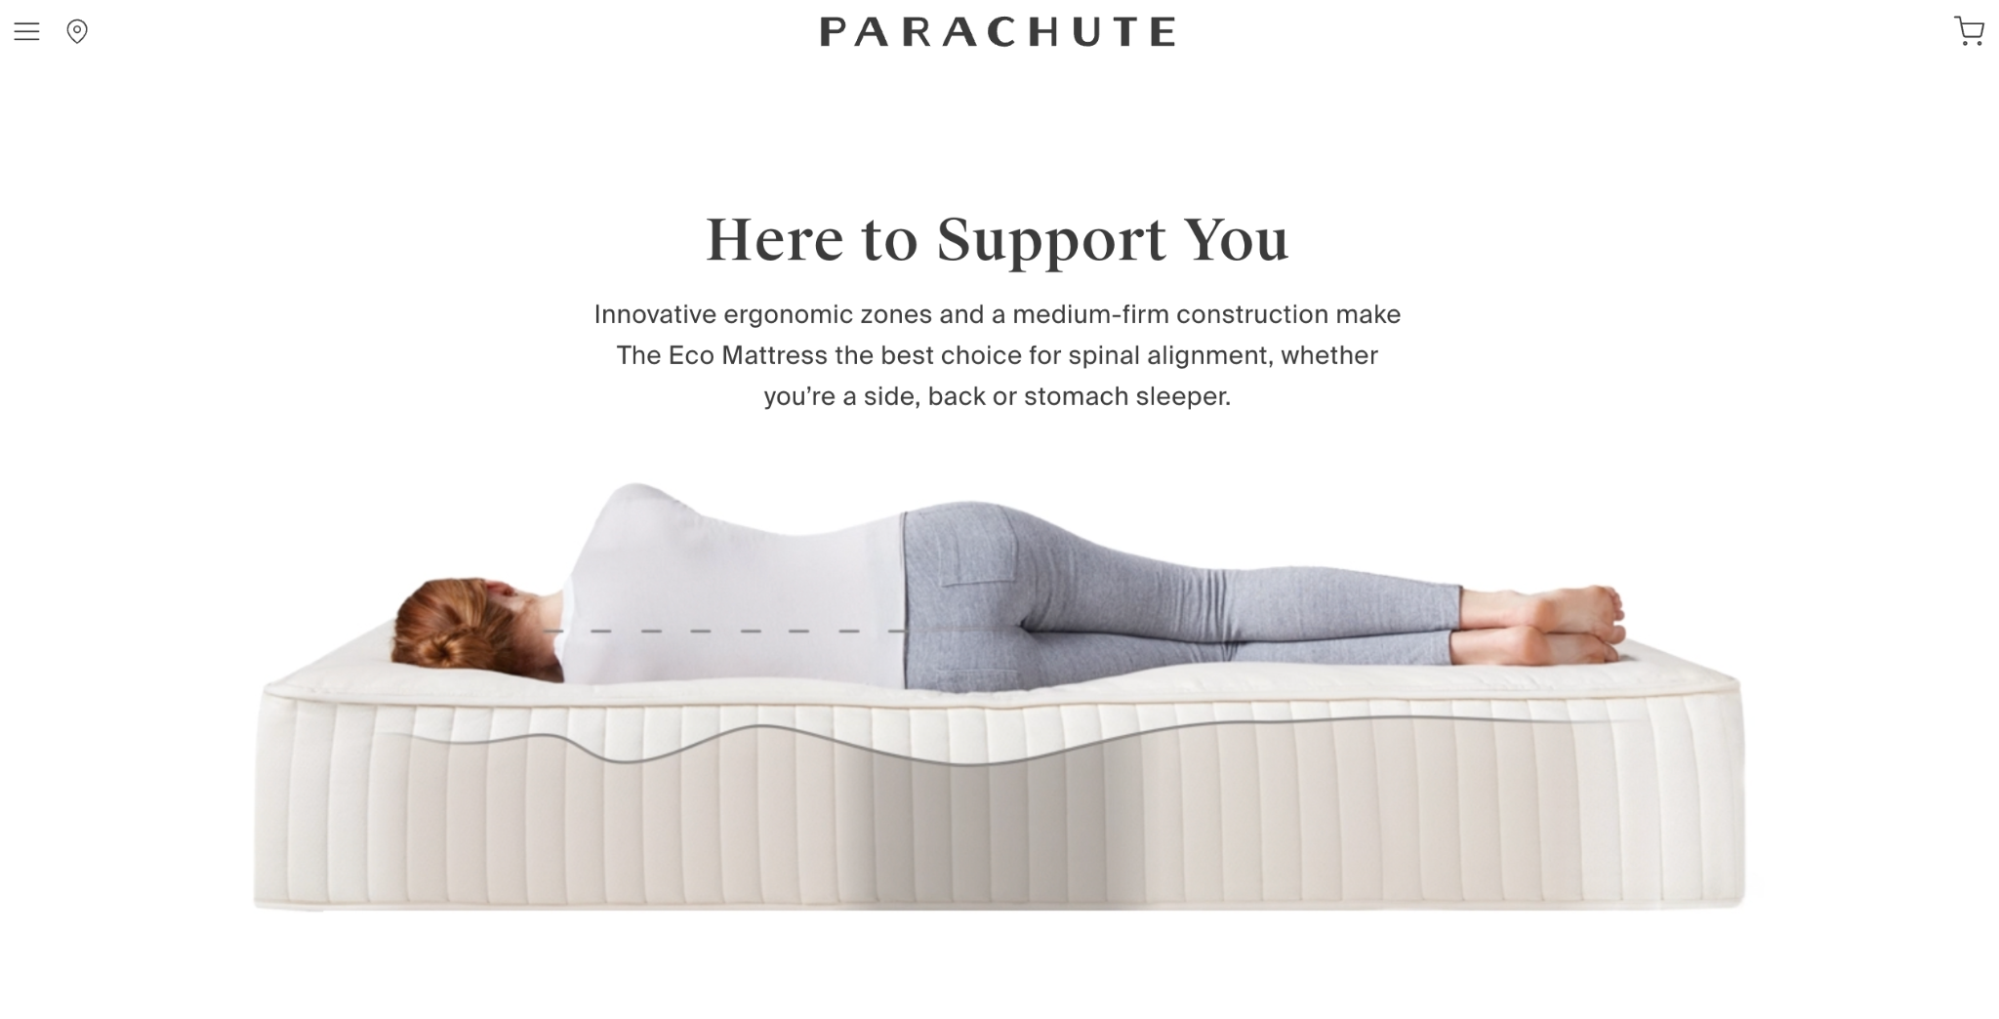 Headline on Parachute’s website says, “Here to Support You”, with a woman lying on a mattress.